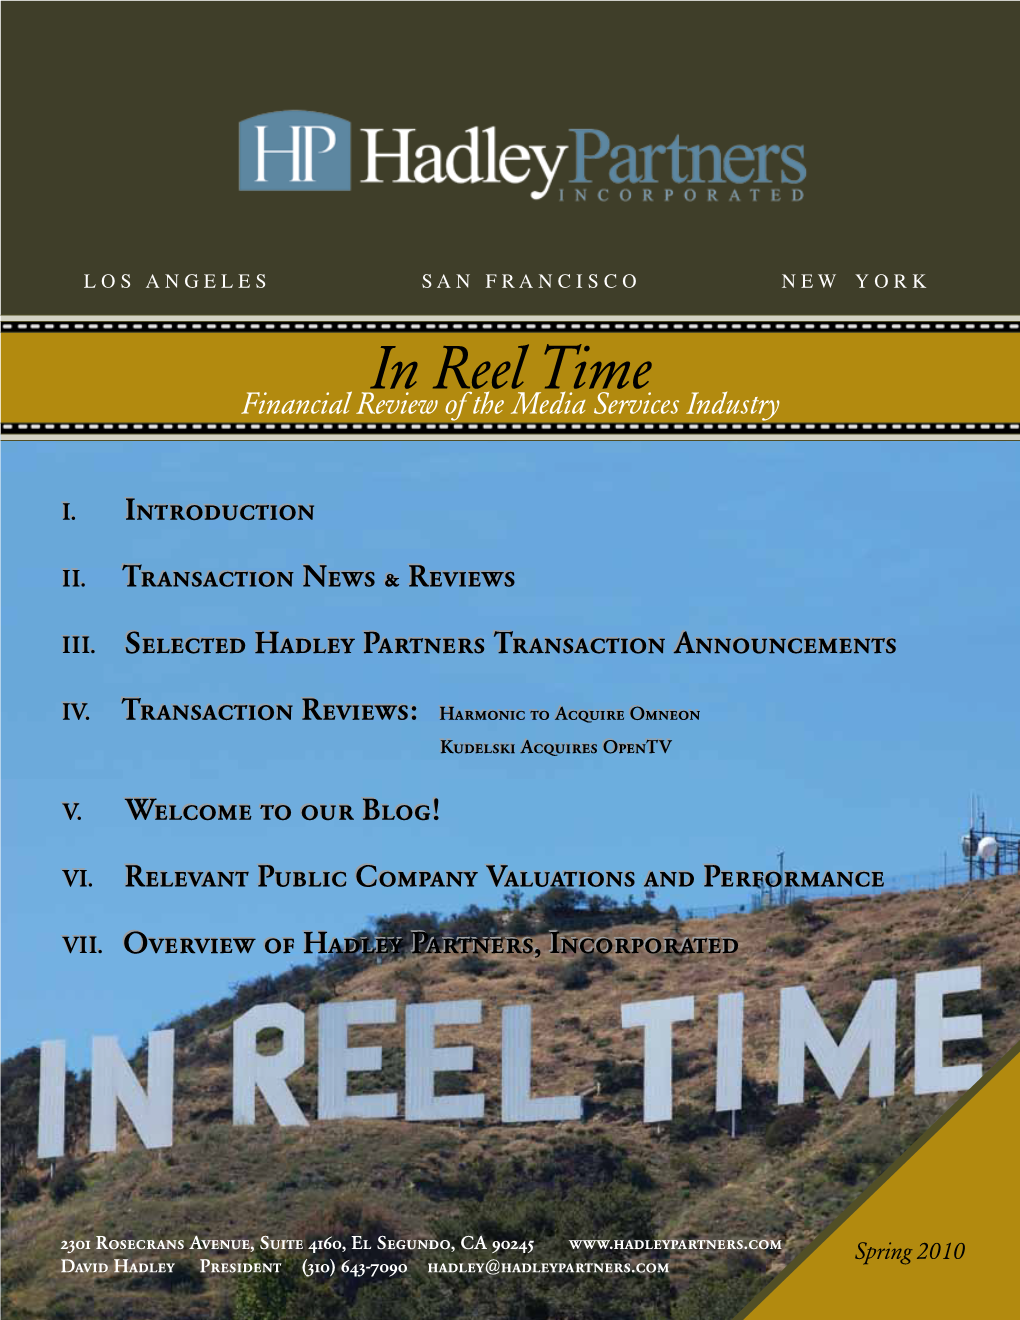 In Reel Time Financial Review of the Media Services Industry